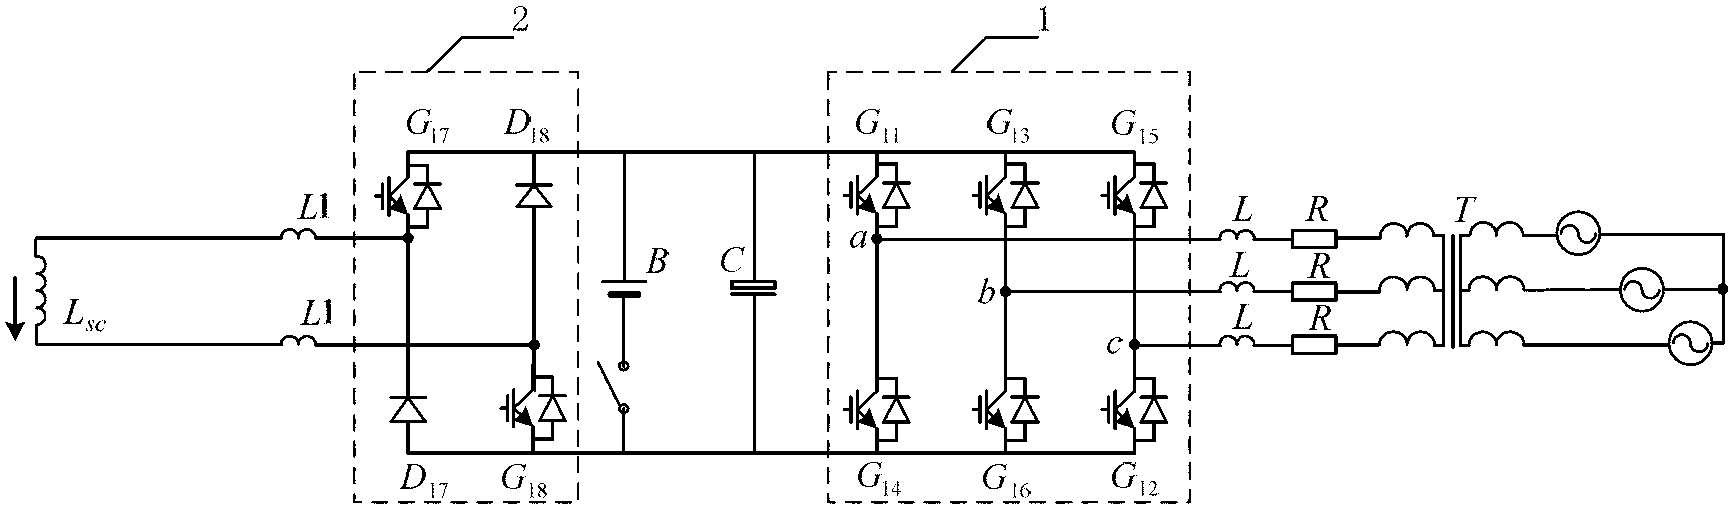 High-capacity combined converter used for electric energy storage